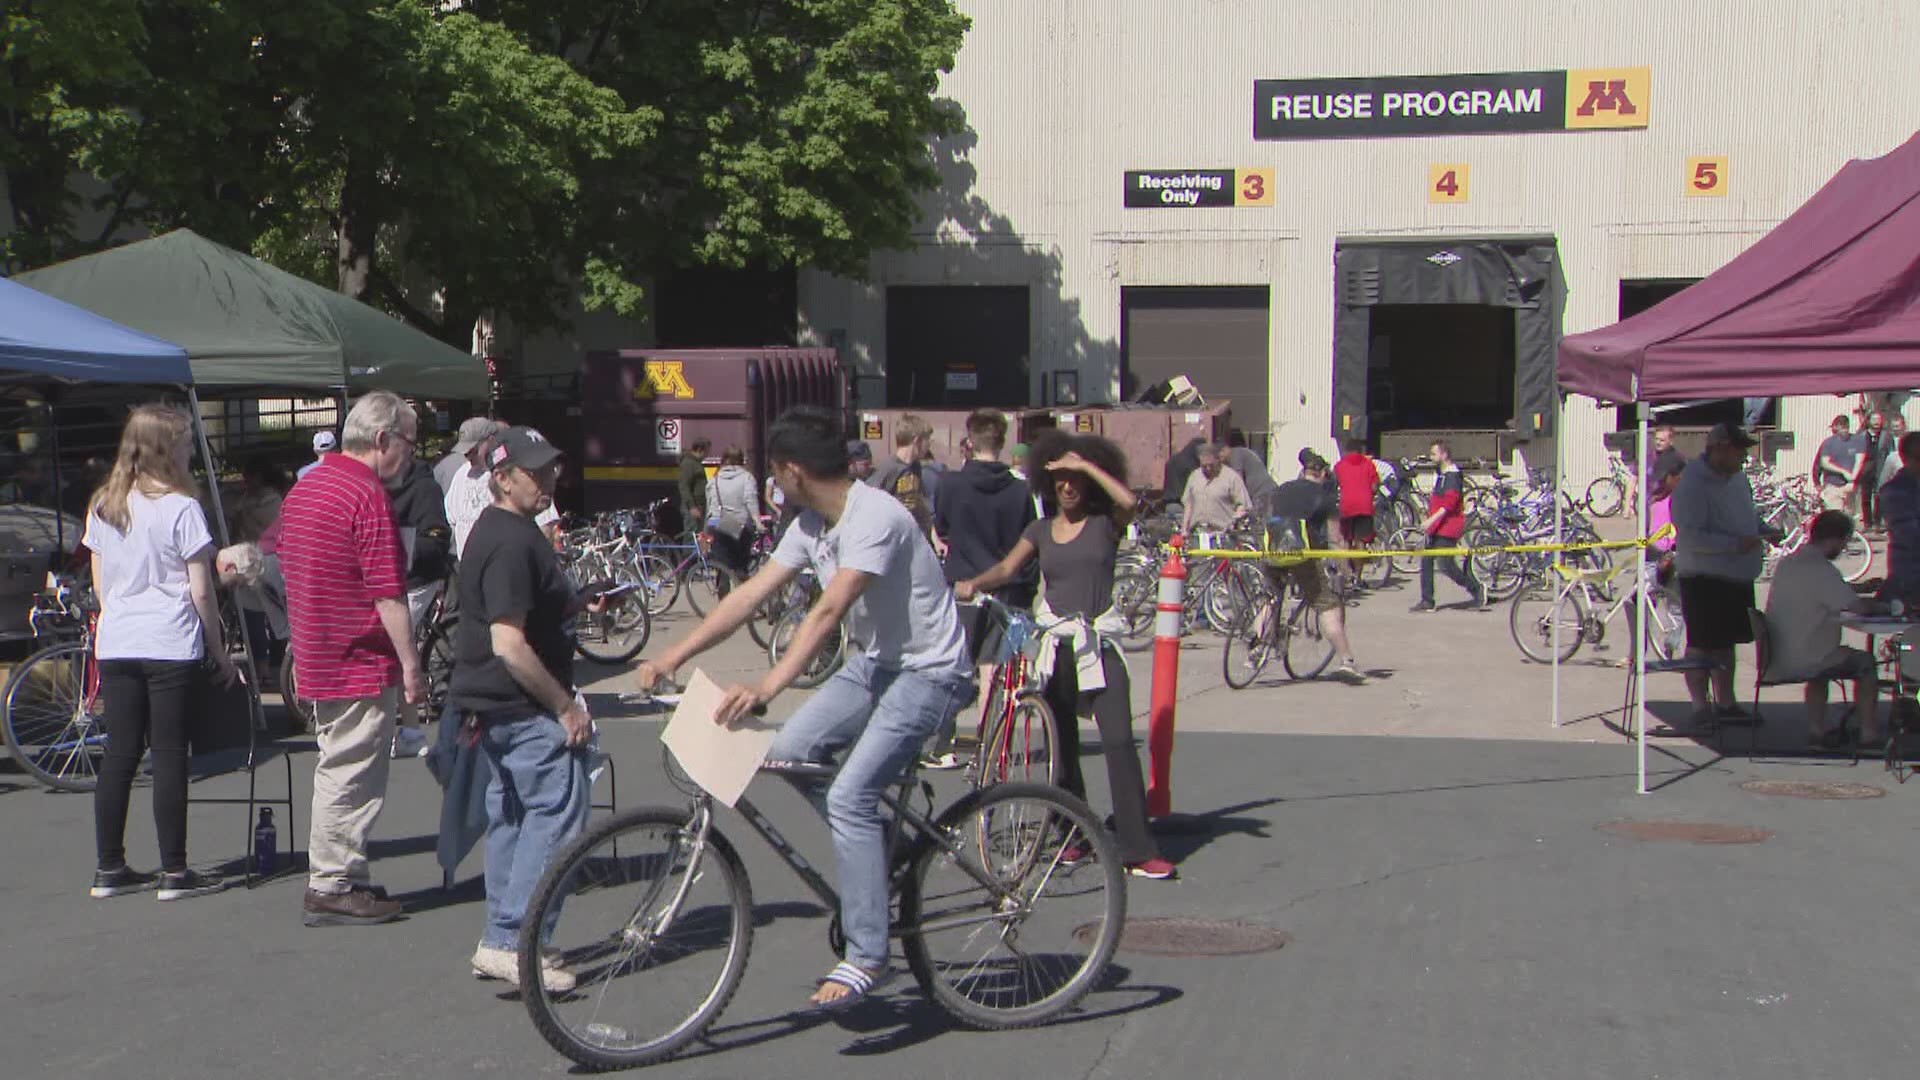 The U of M's ReUse Program sold more than 100 abandoned bikes, starting as low as $50.